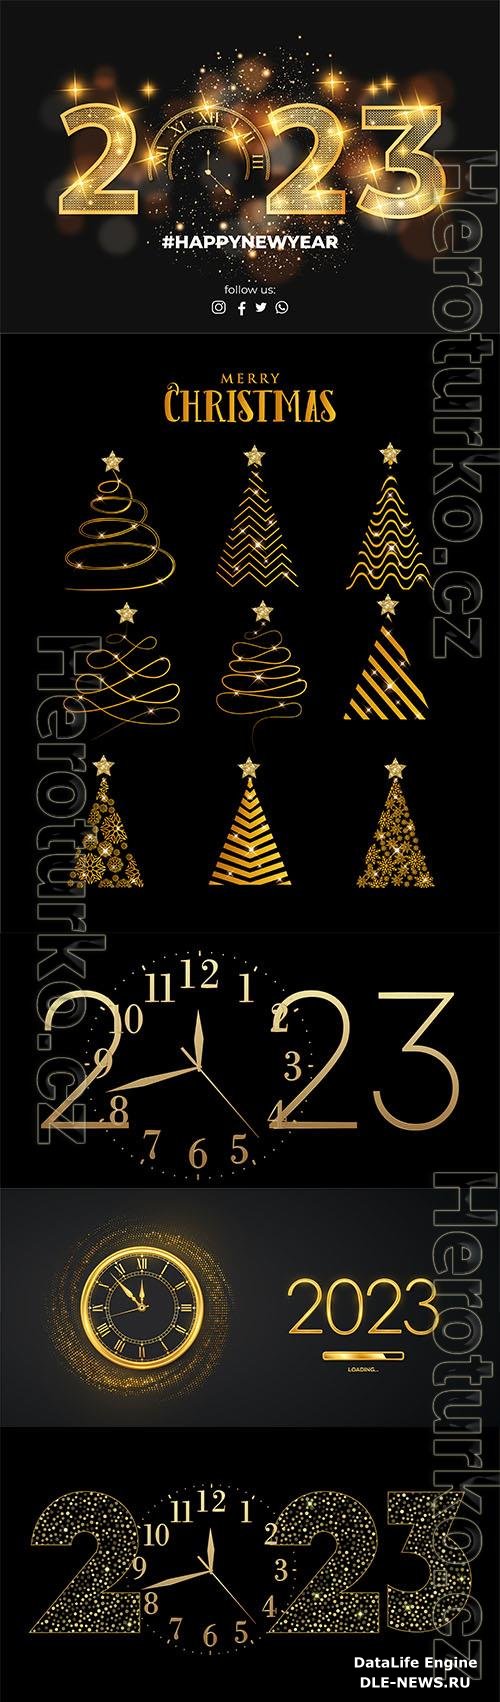 Happy new year 2023 and Merry christmas vector background